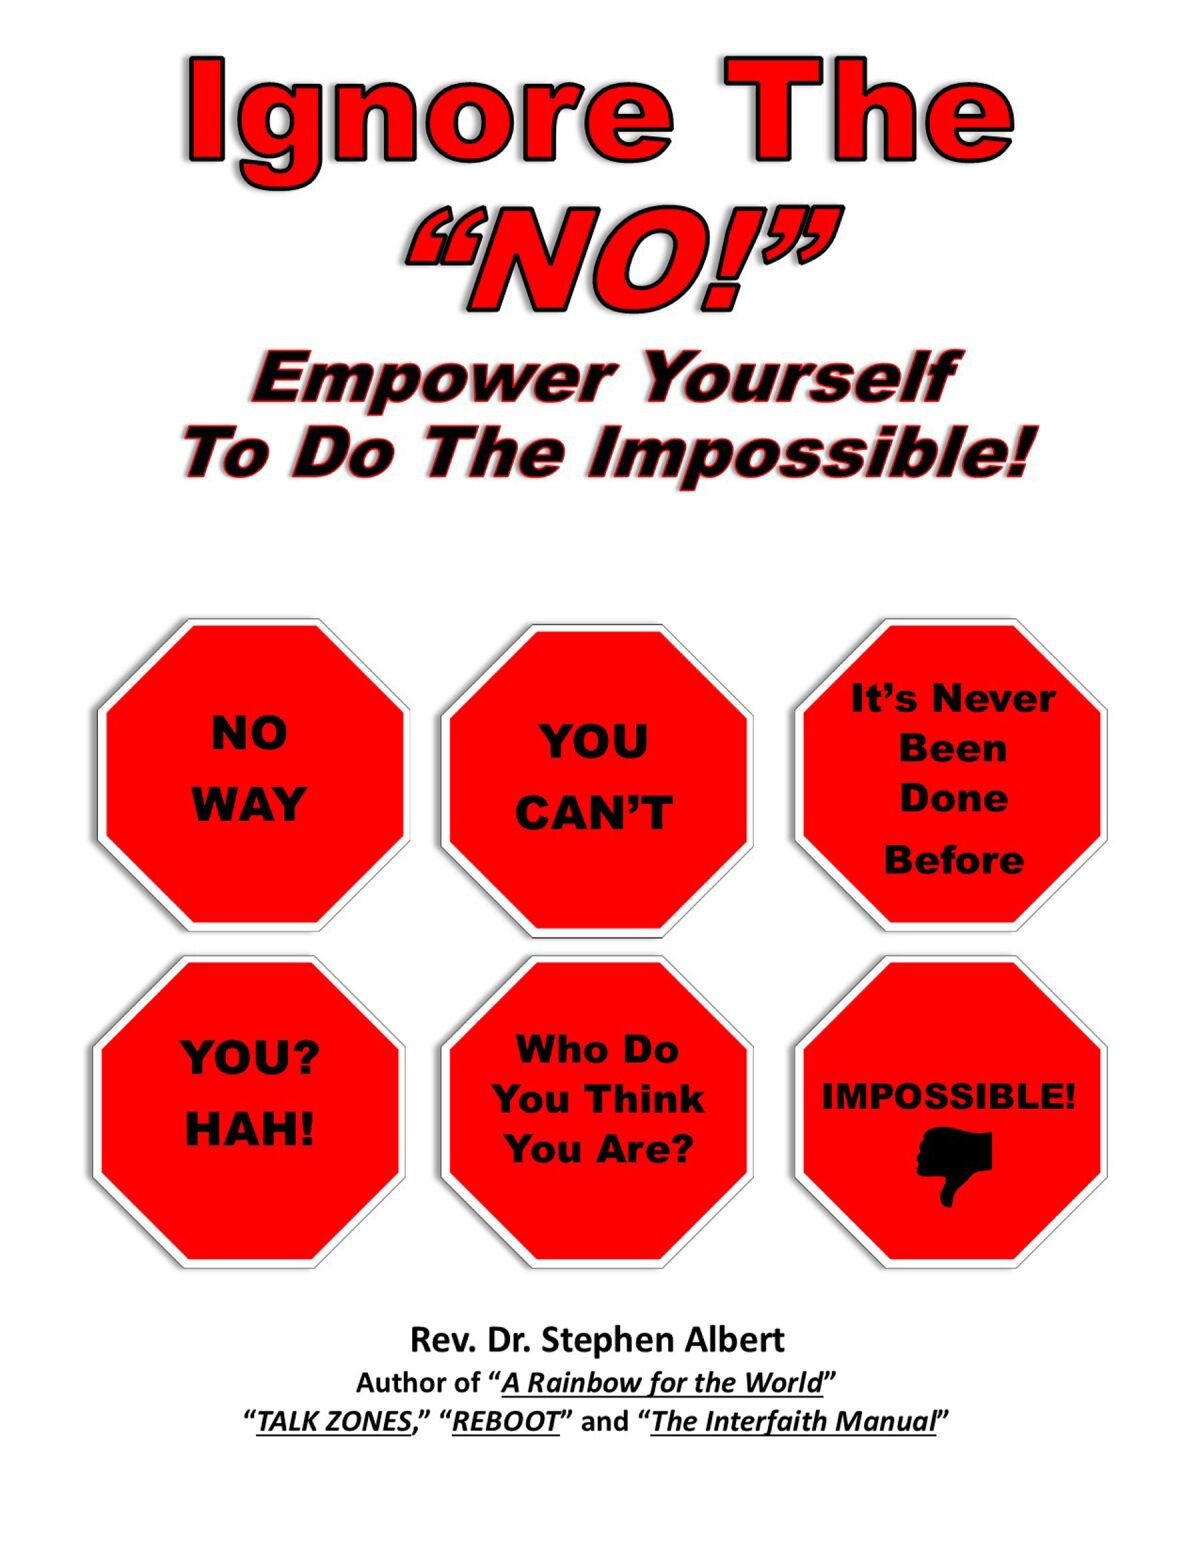 Cover of "Ignore the 'NO!' Empower Yourself to Do the Impossible" by Poway resident Stephen Albert.